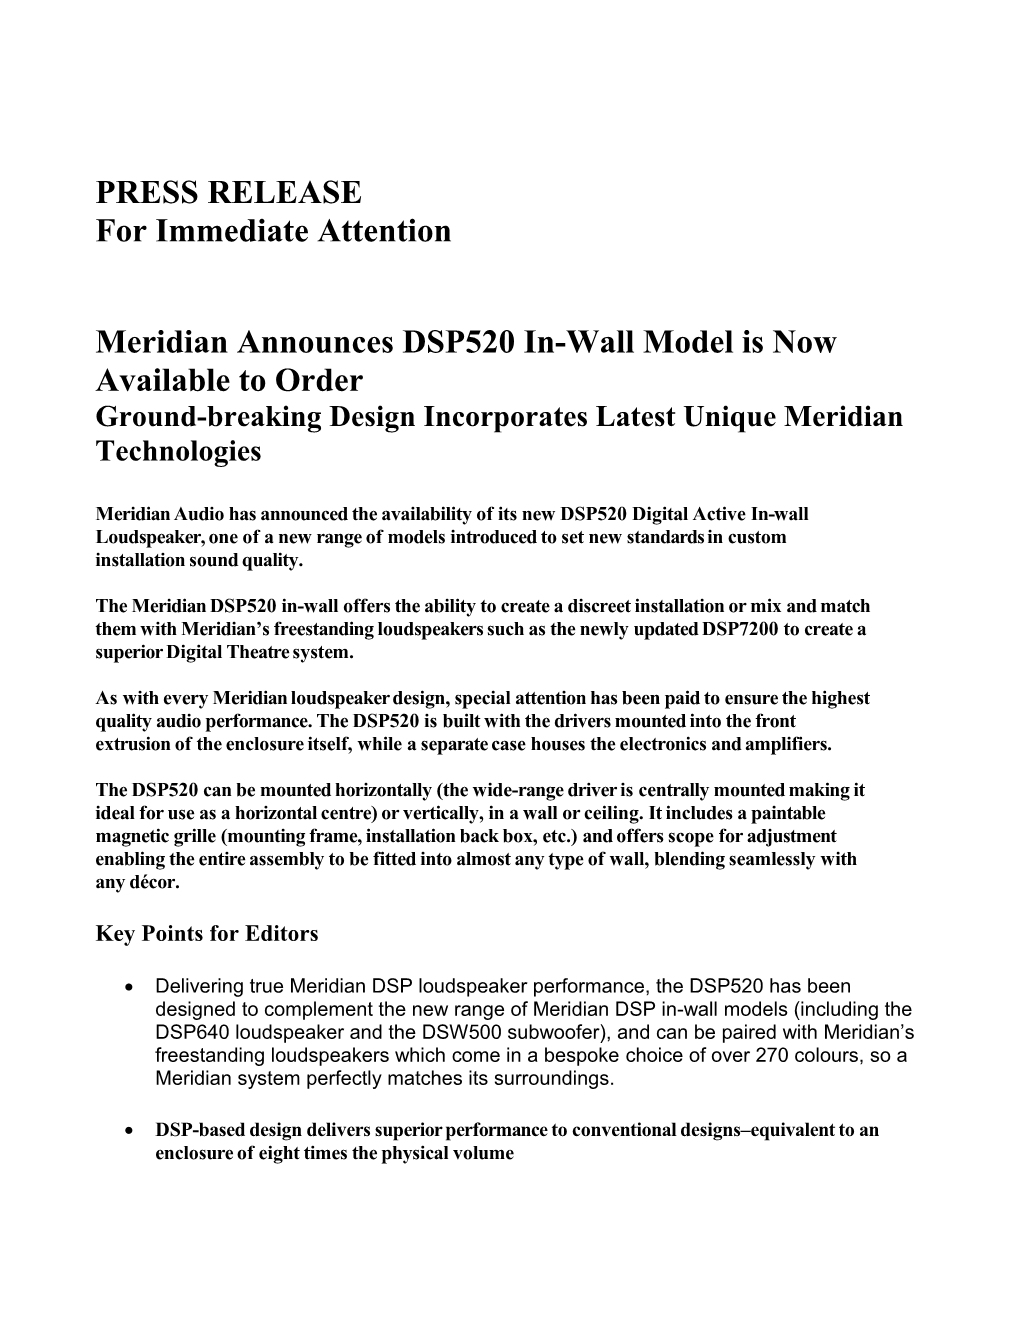 Meridian Announces DSP520 In-Wall Model Is Now Available to Order